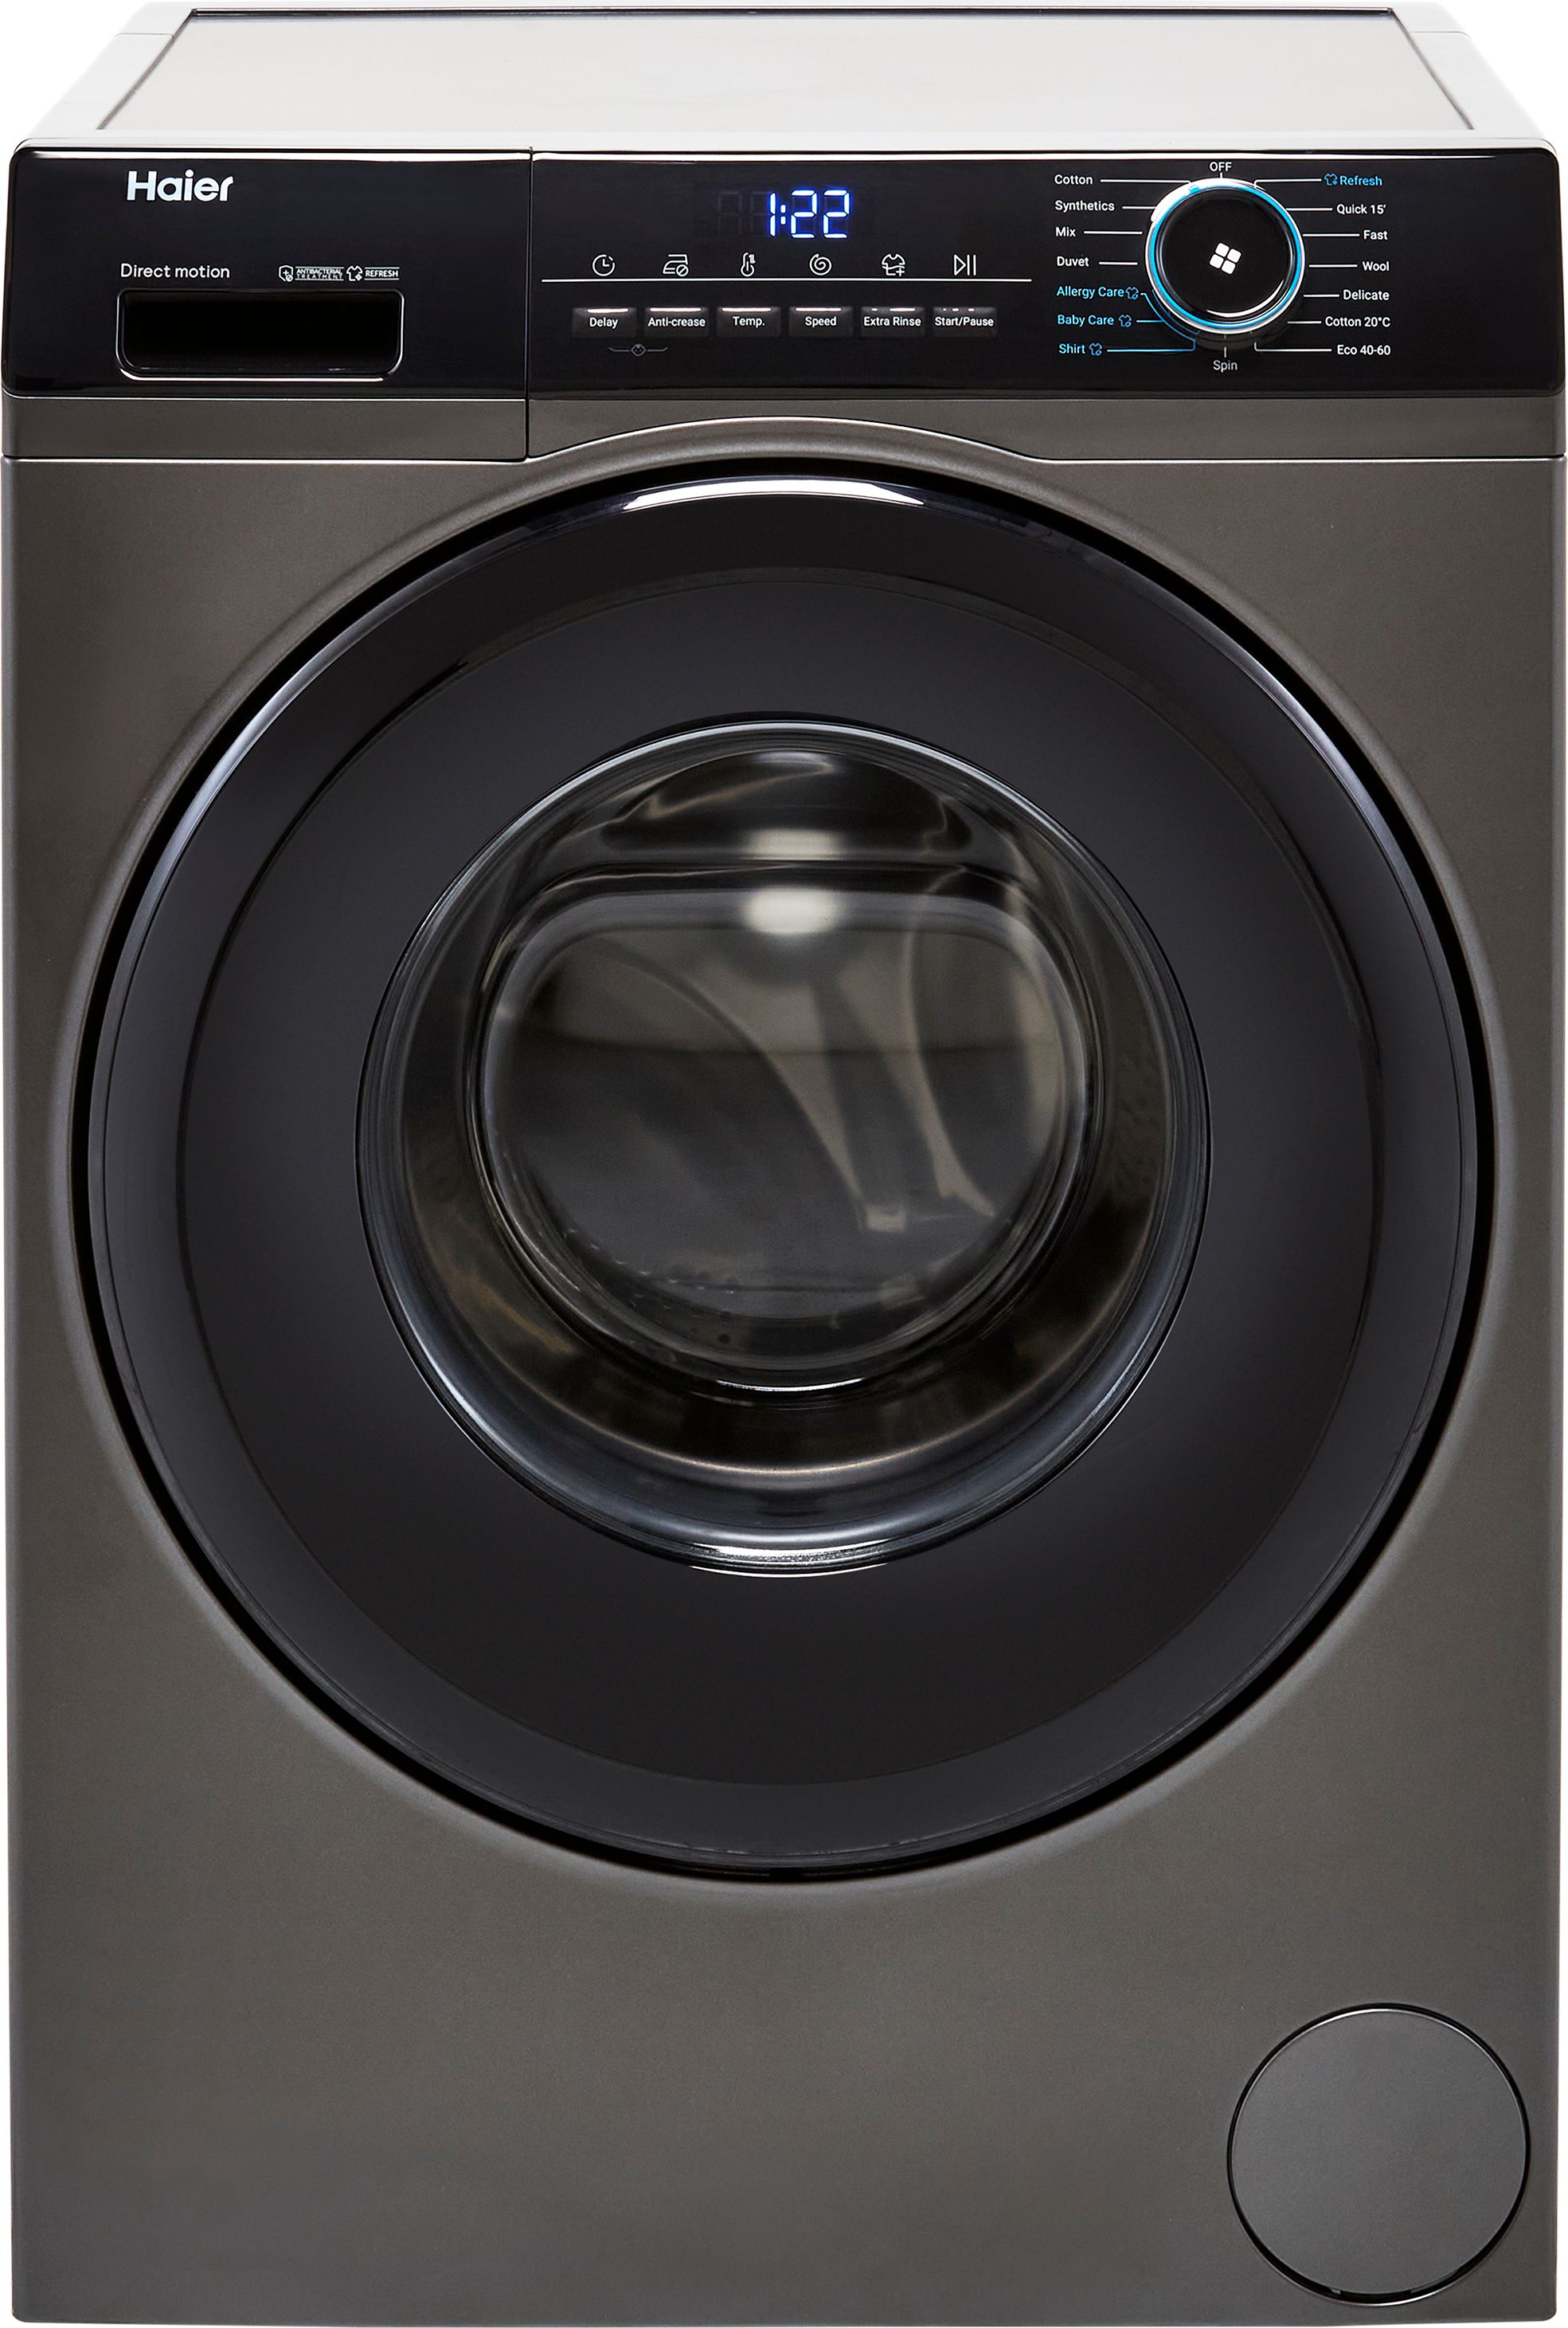 Haier i-Pro Series 3 HW90-B14939S 9kg Washing Machine with 1400 rpm - Anthracite - A Rated, Black